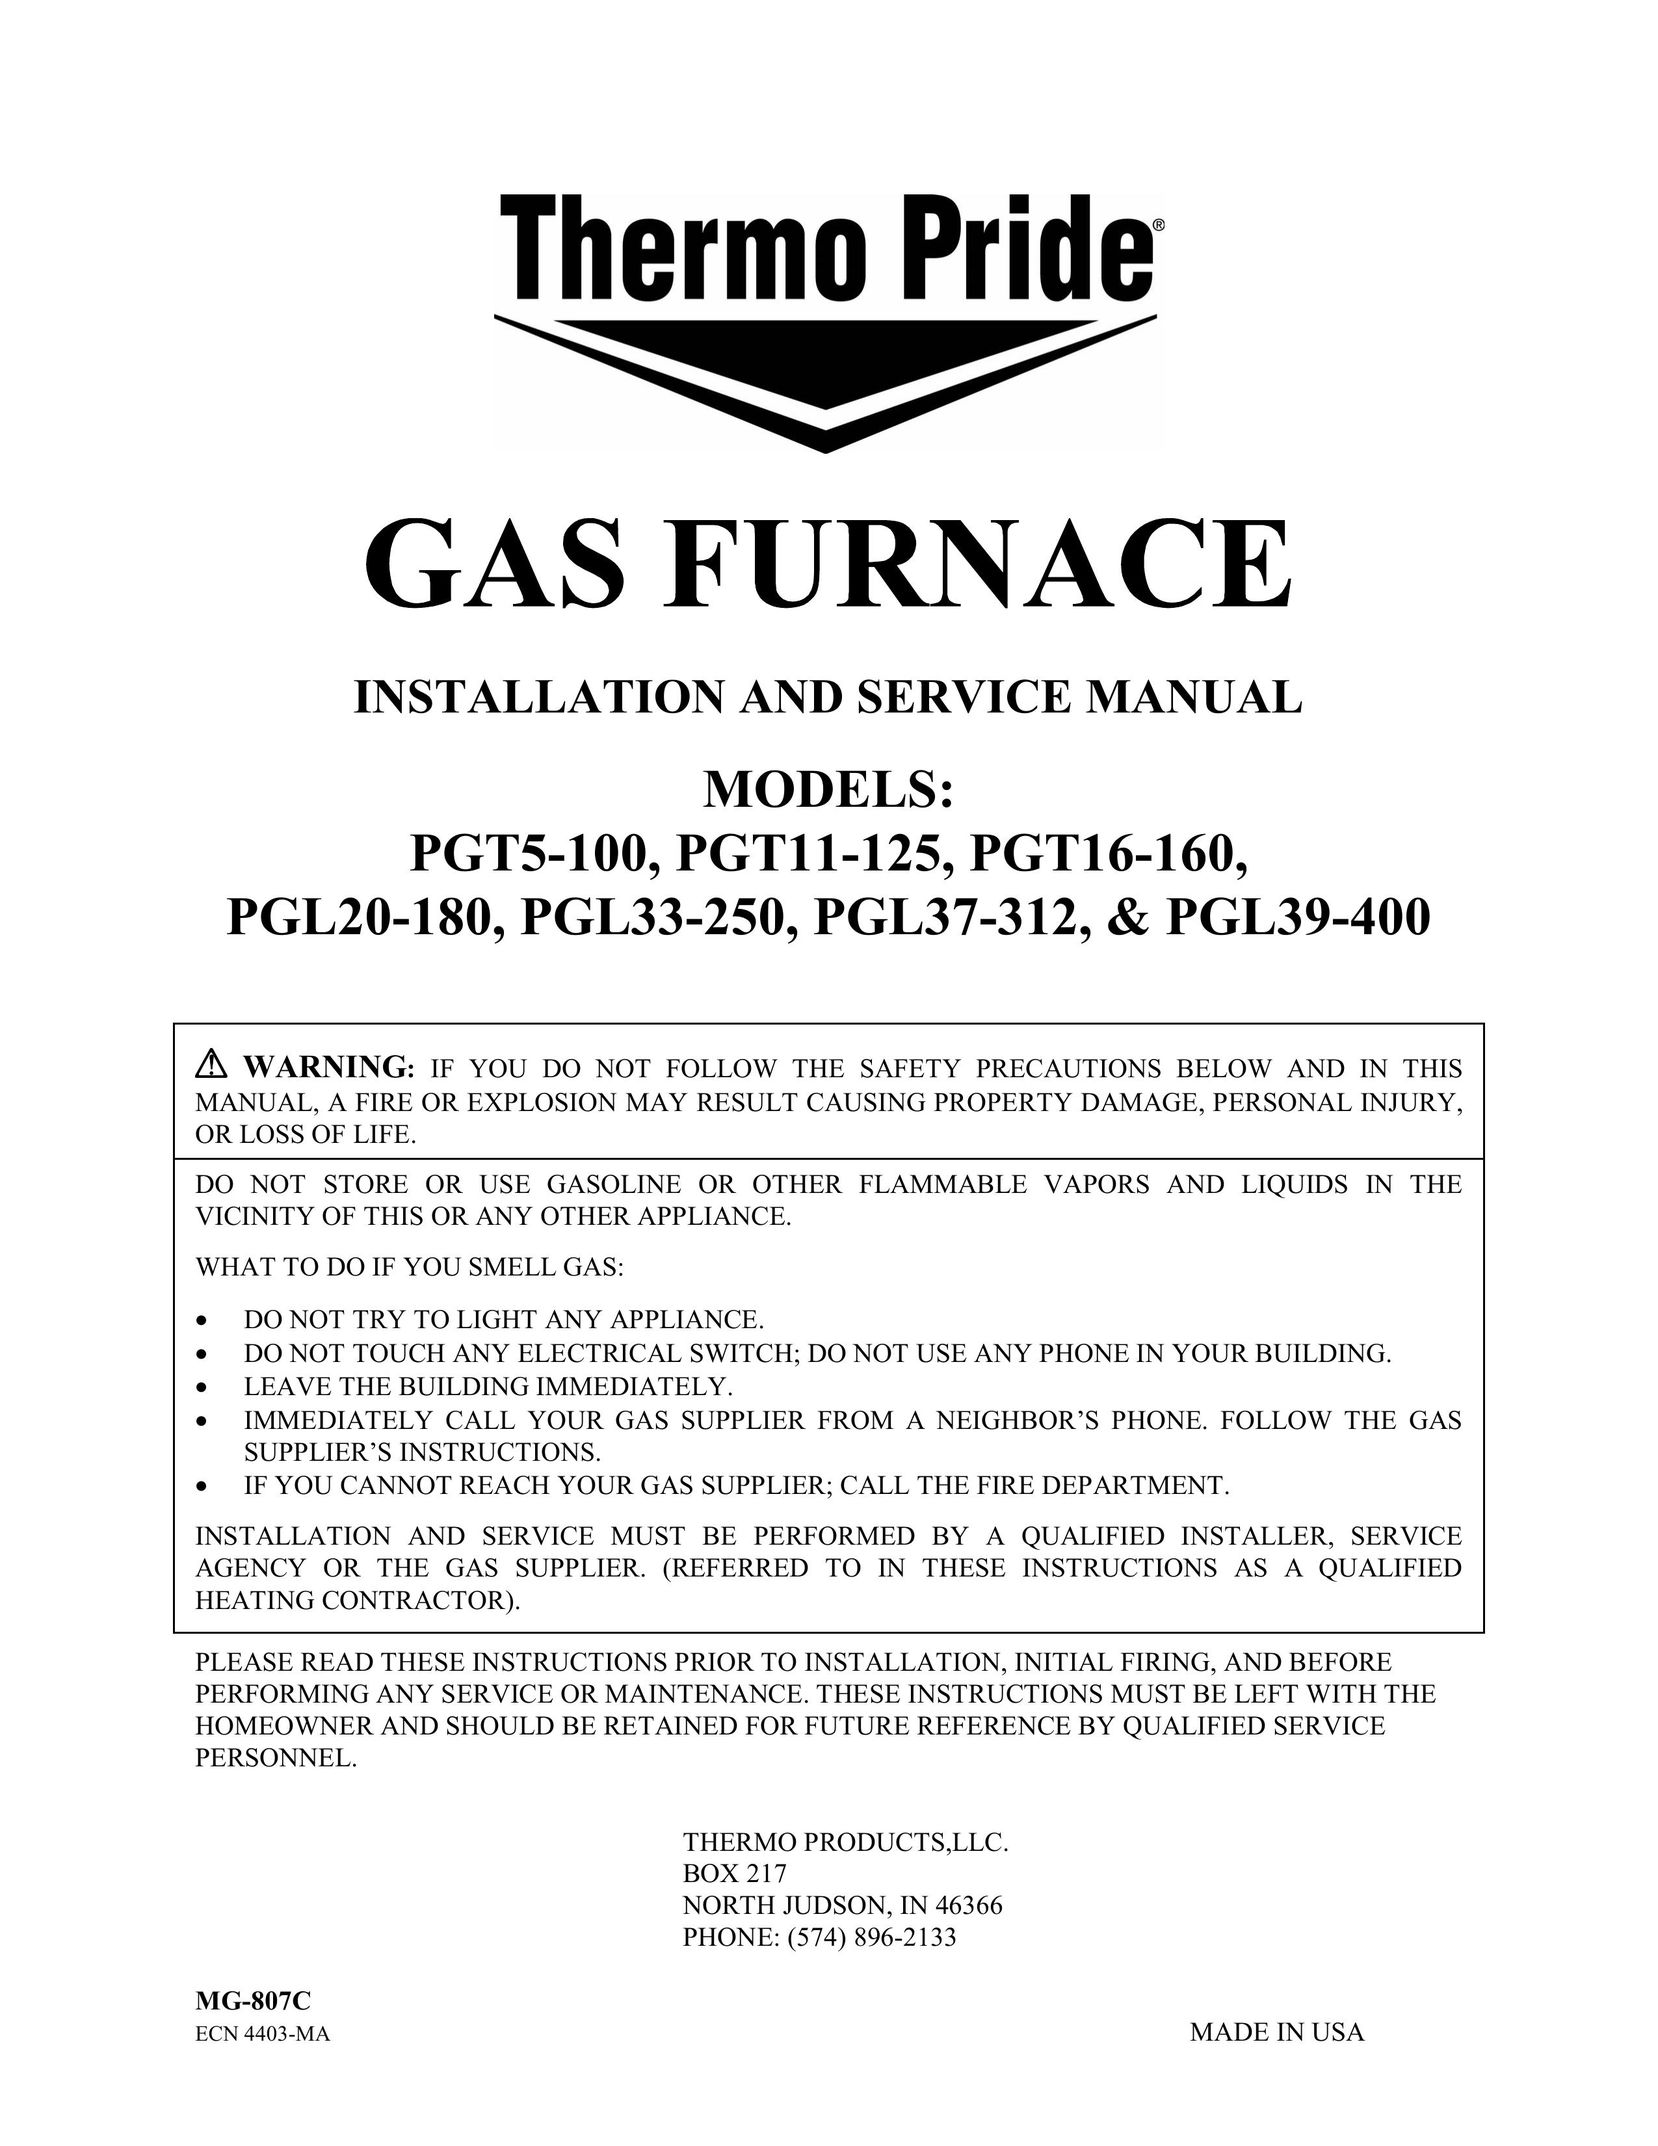 Thermo Products PGL37-312 Burner User Manual